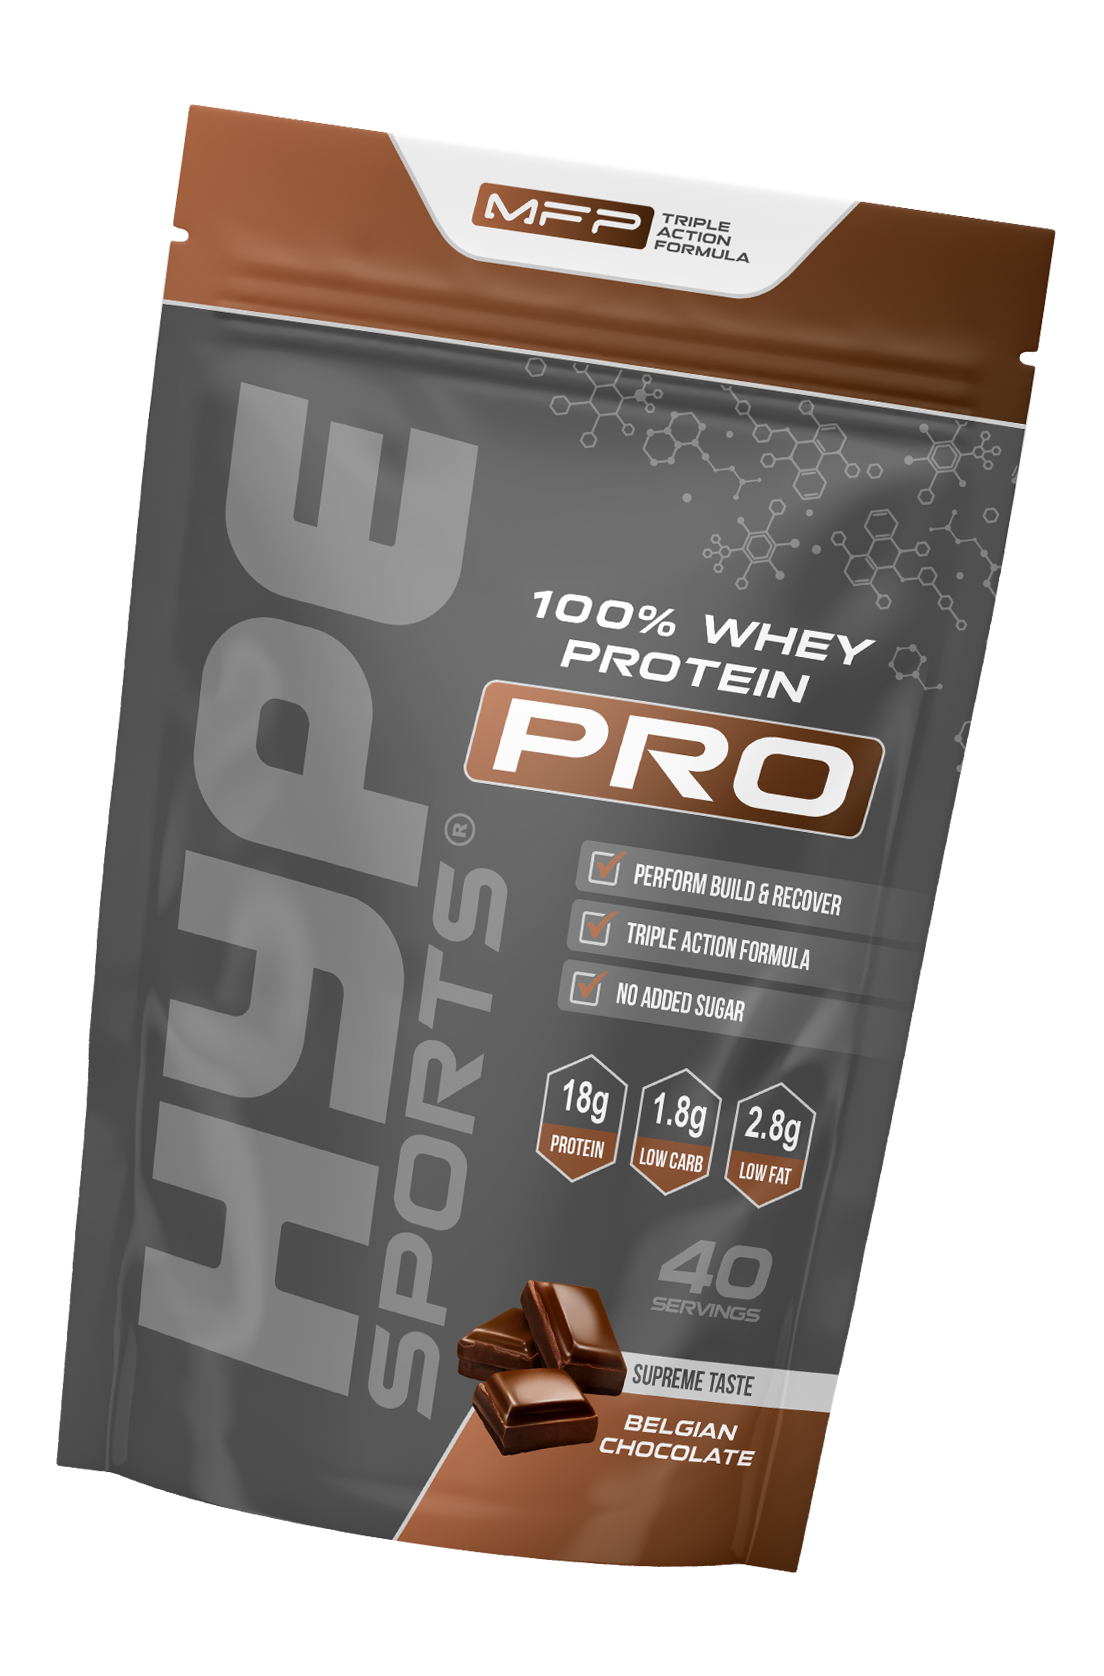 Hype’s protein powder Pro chocolate crunch flavoured, in a bag.